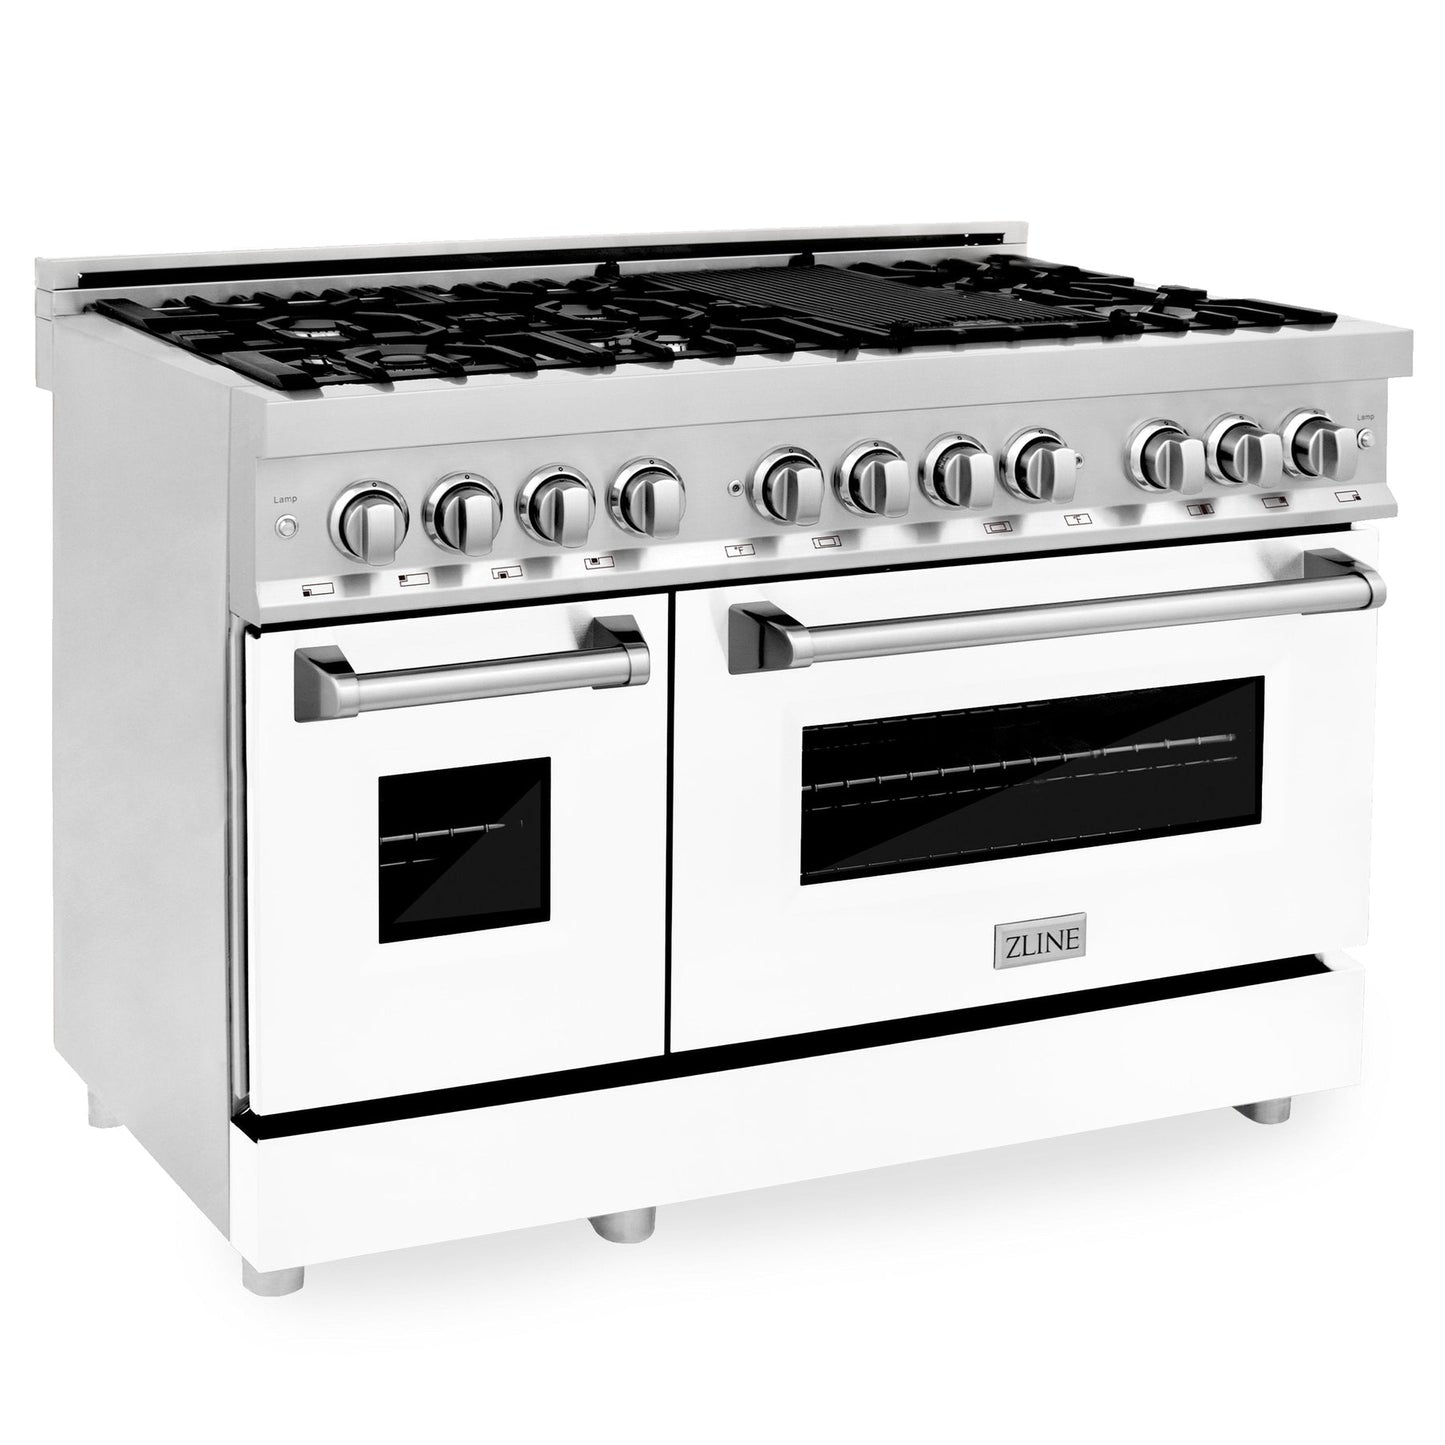 ZLINE 48" Dual Fuel Range with Gas Stove and Electric Oven in Stainless Steel (RA-48)